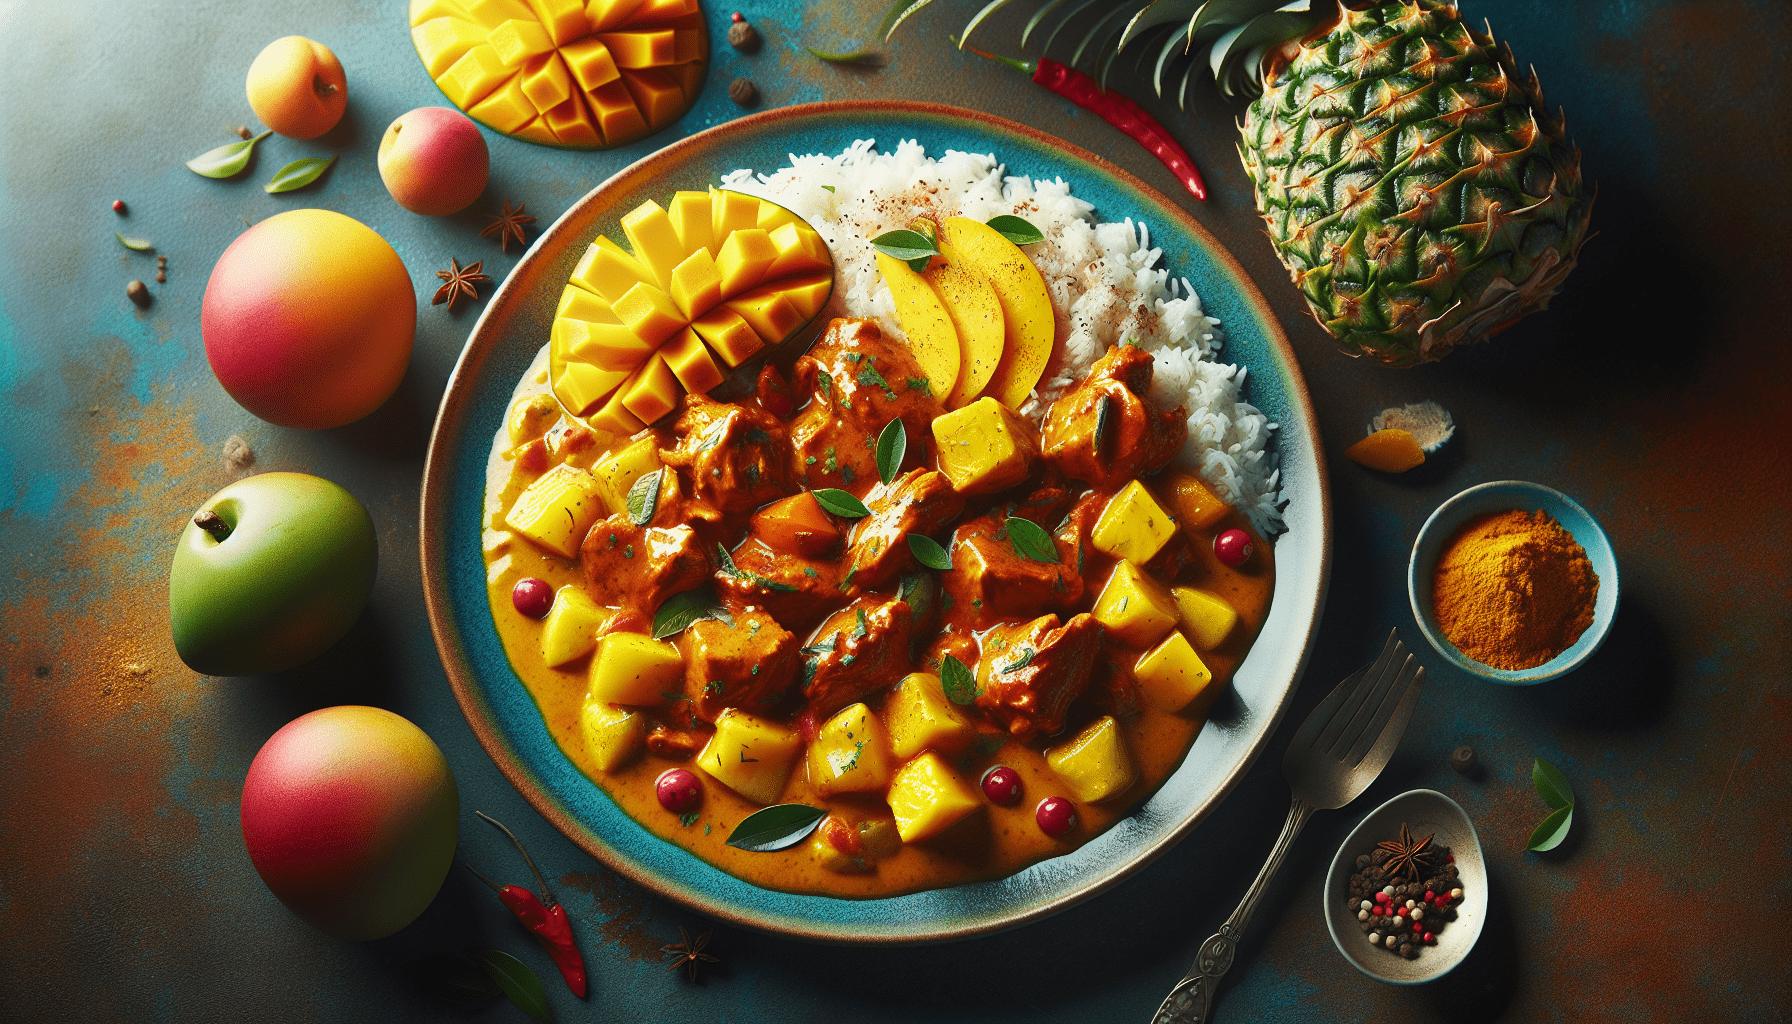 Share A Taste Of The Caribbean With Your Go-to Recipe For A Tropical Dish.